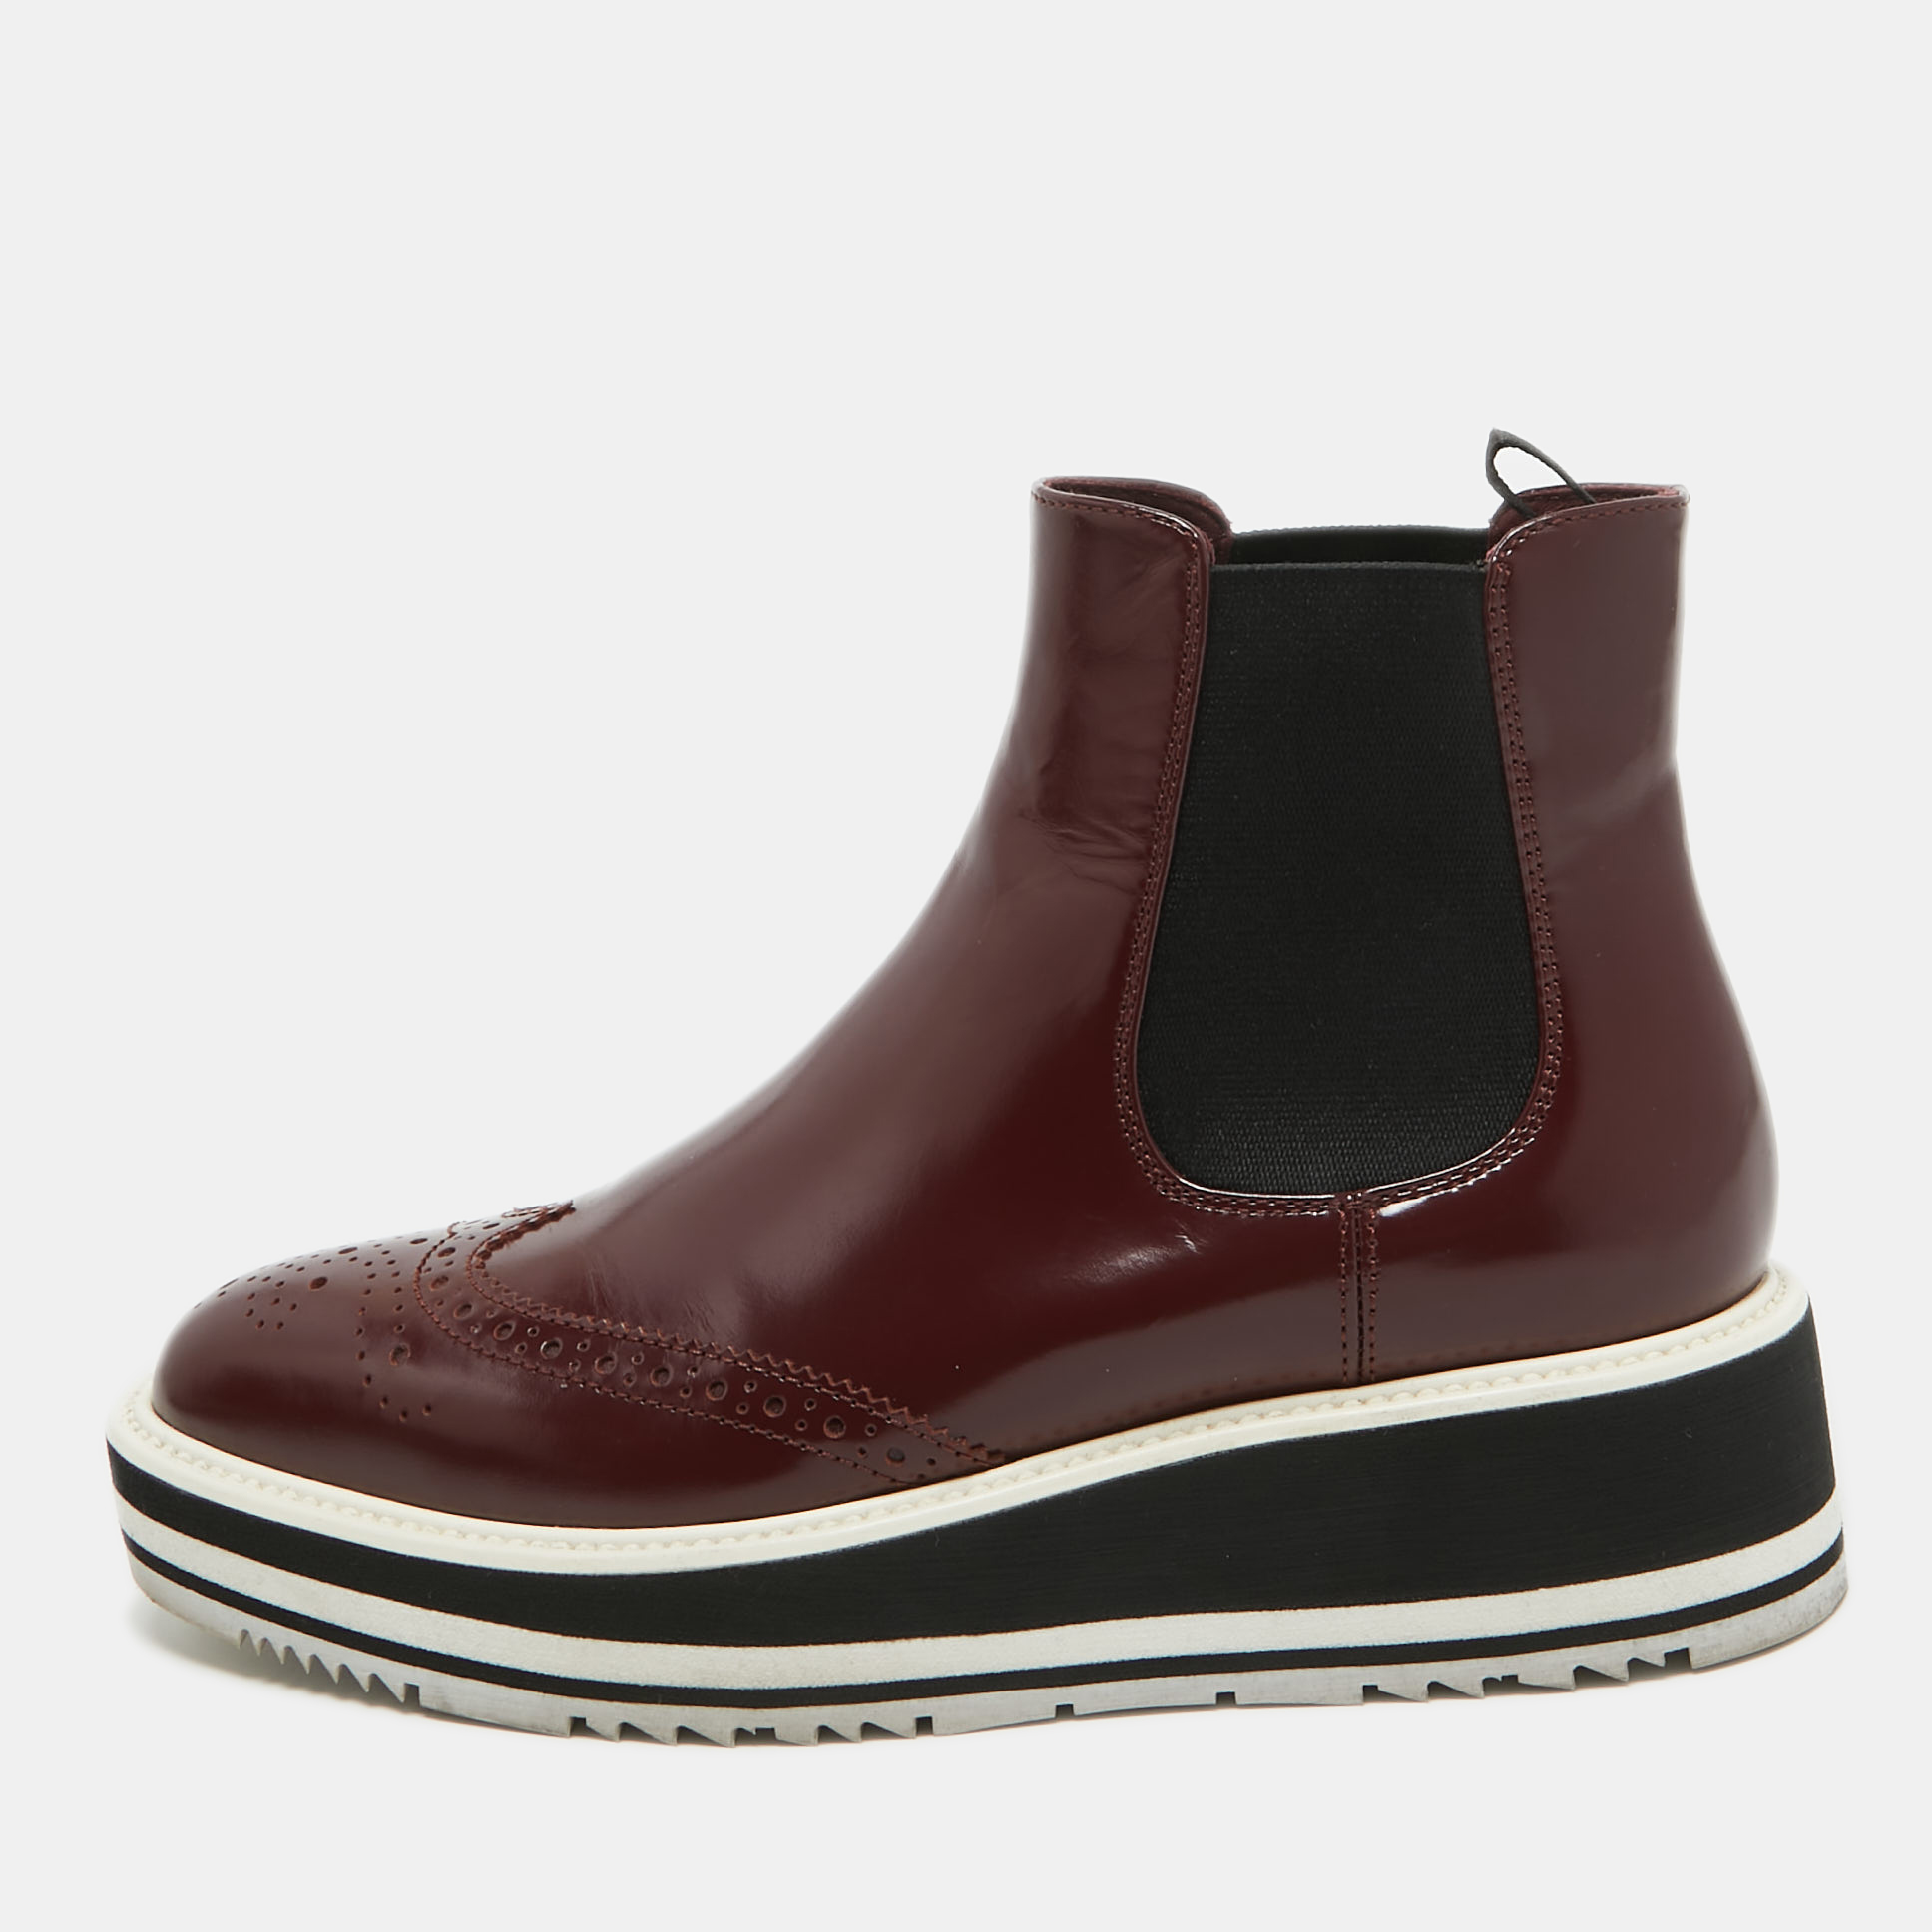 Prada Maroon Leather Brogue Ankle Boots Size 35